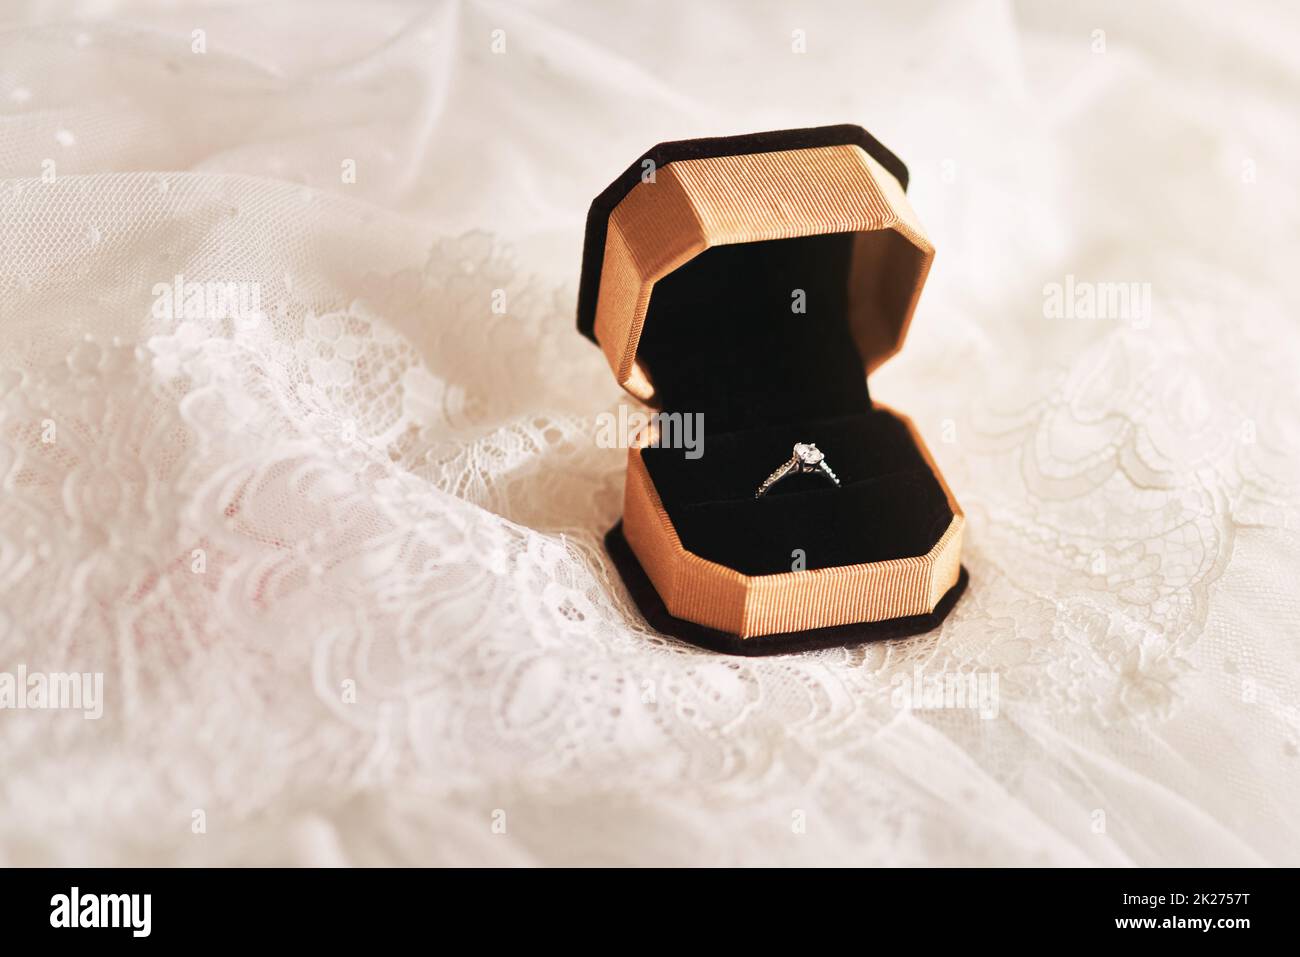 A ring fit for a special occasion in life Stock Photo